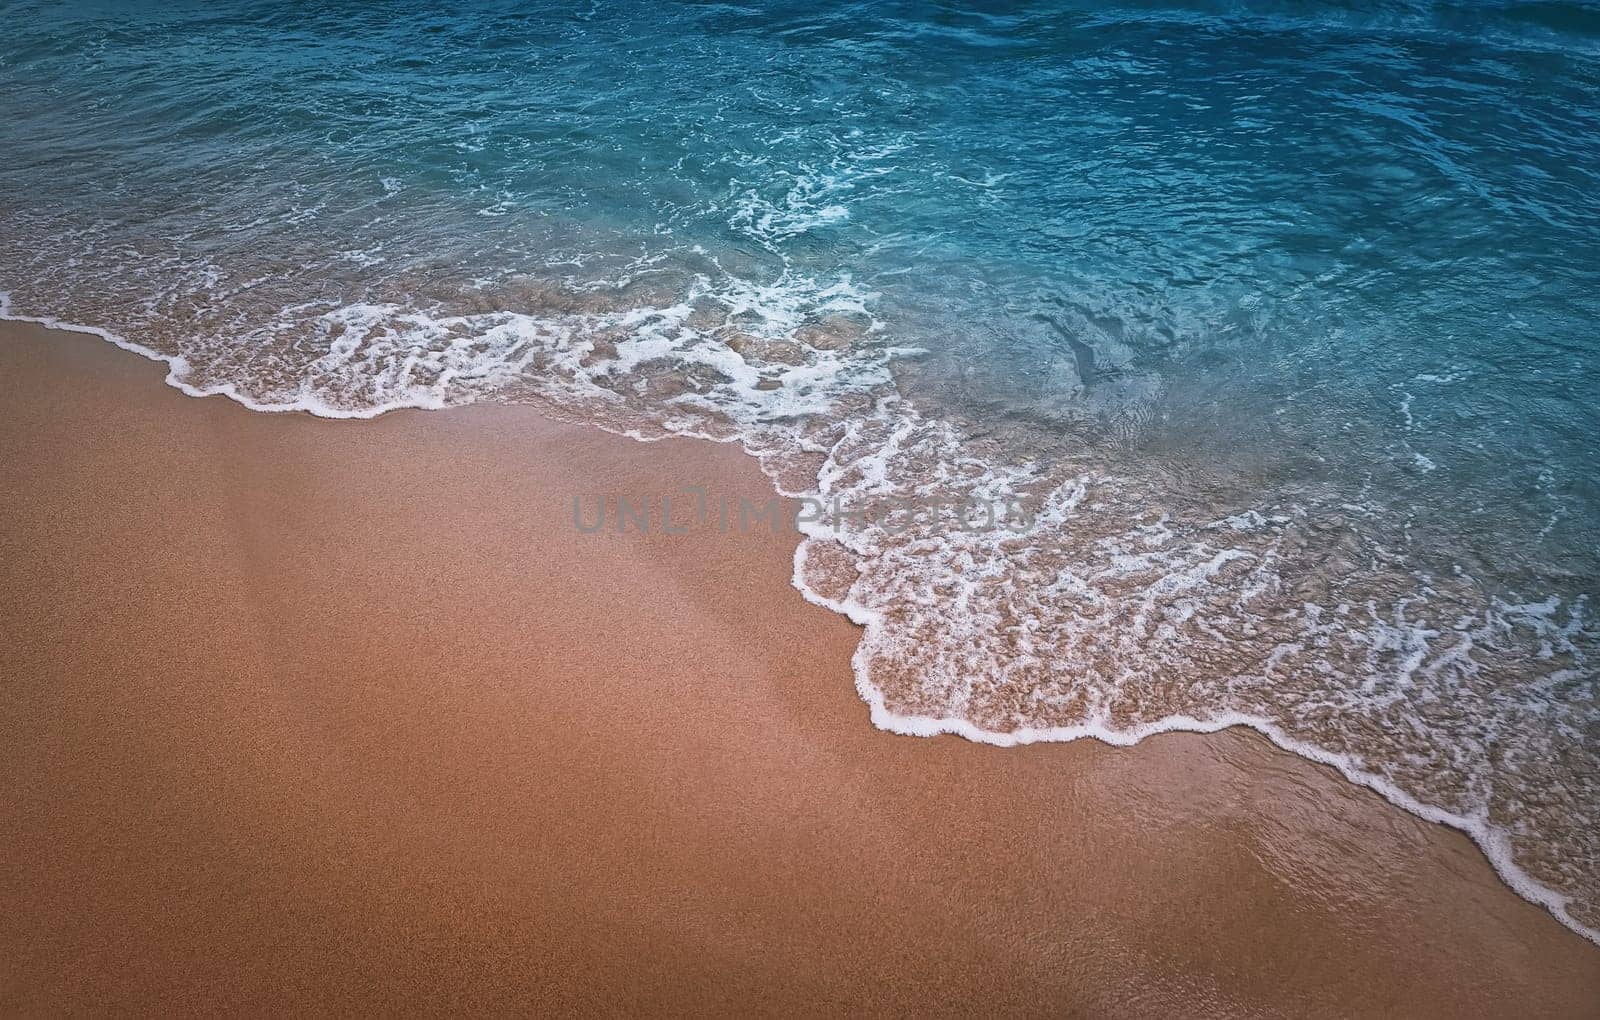 Serene blue sea with foamy waves hits the sandy shore. Beach and water texture, moody vertical background. Summer vacation seaside, holiday recreation concept by psychoshadow